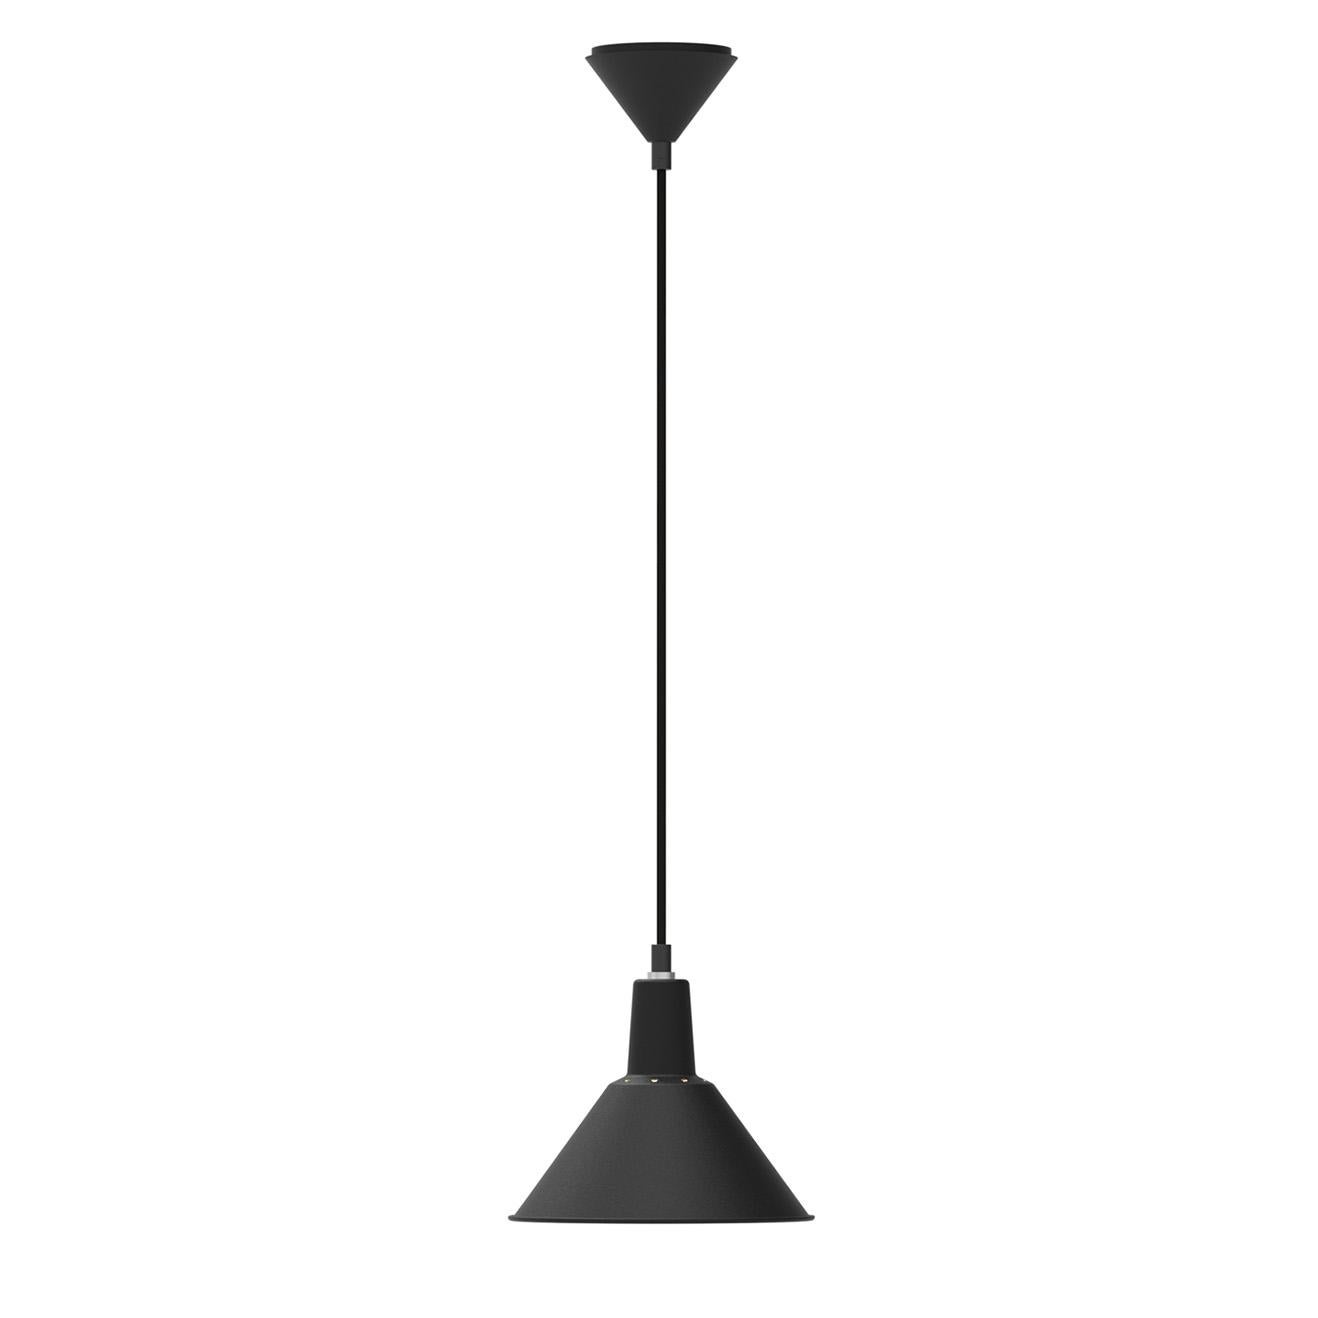 Arcon Lamp Series is an architectural conversion between function and proportion. The Arcon Pendant Lamp was a natural line extension of the Table and Wall Lamp. The small graphic shade is perfect for small spaces, above cupboards, in kitchens or